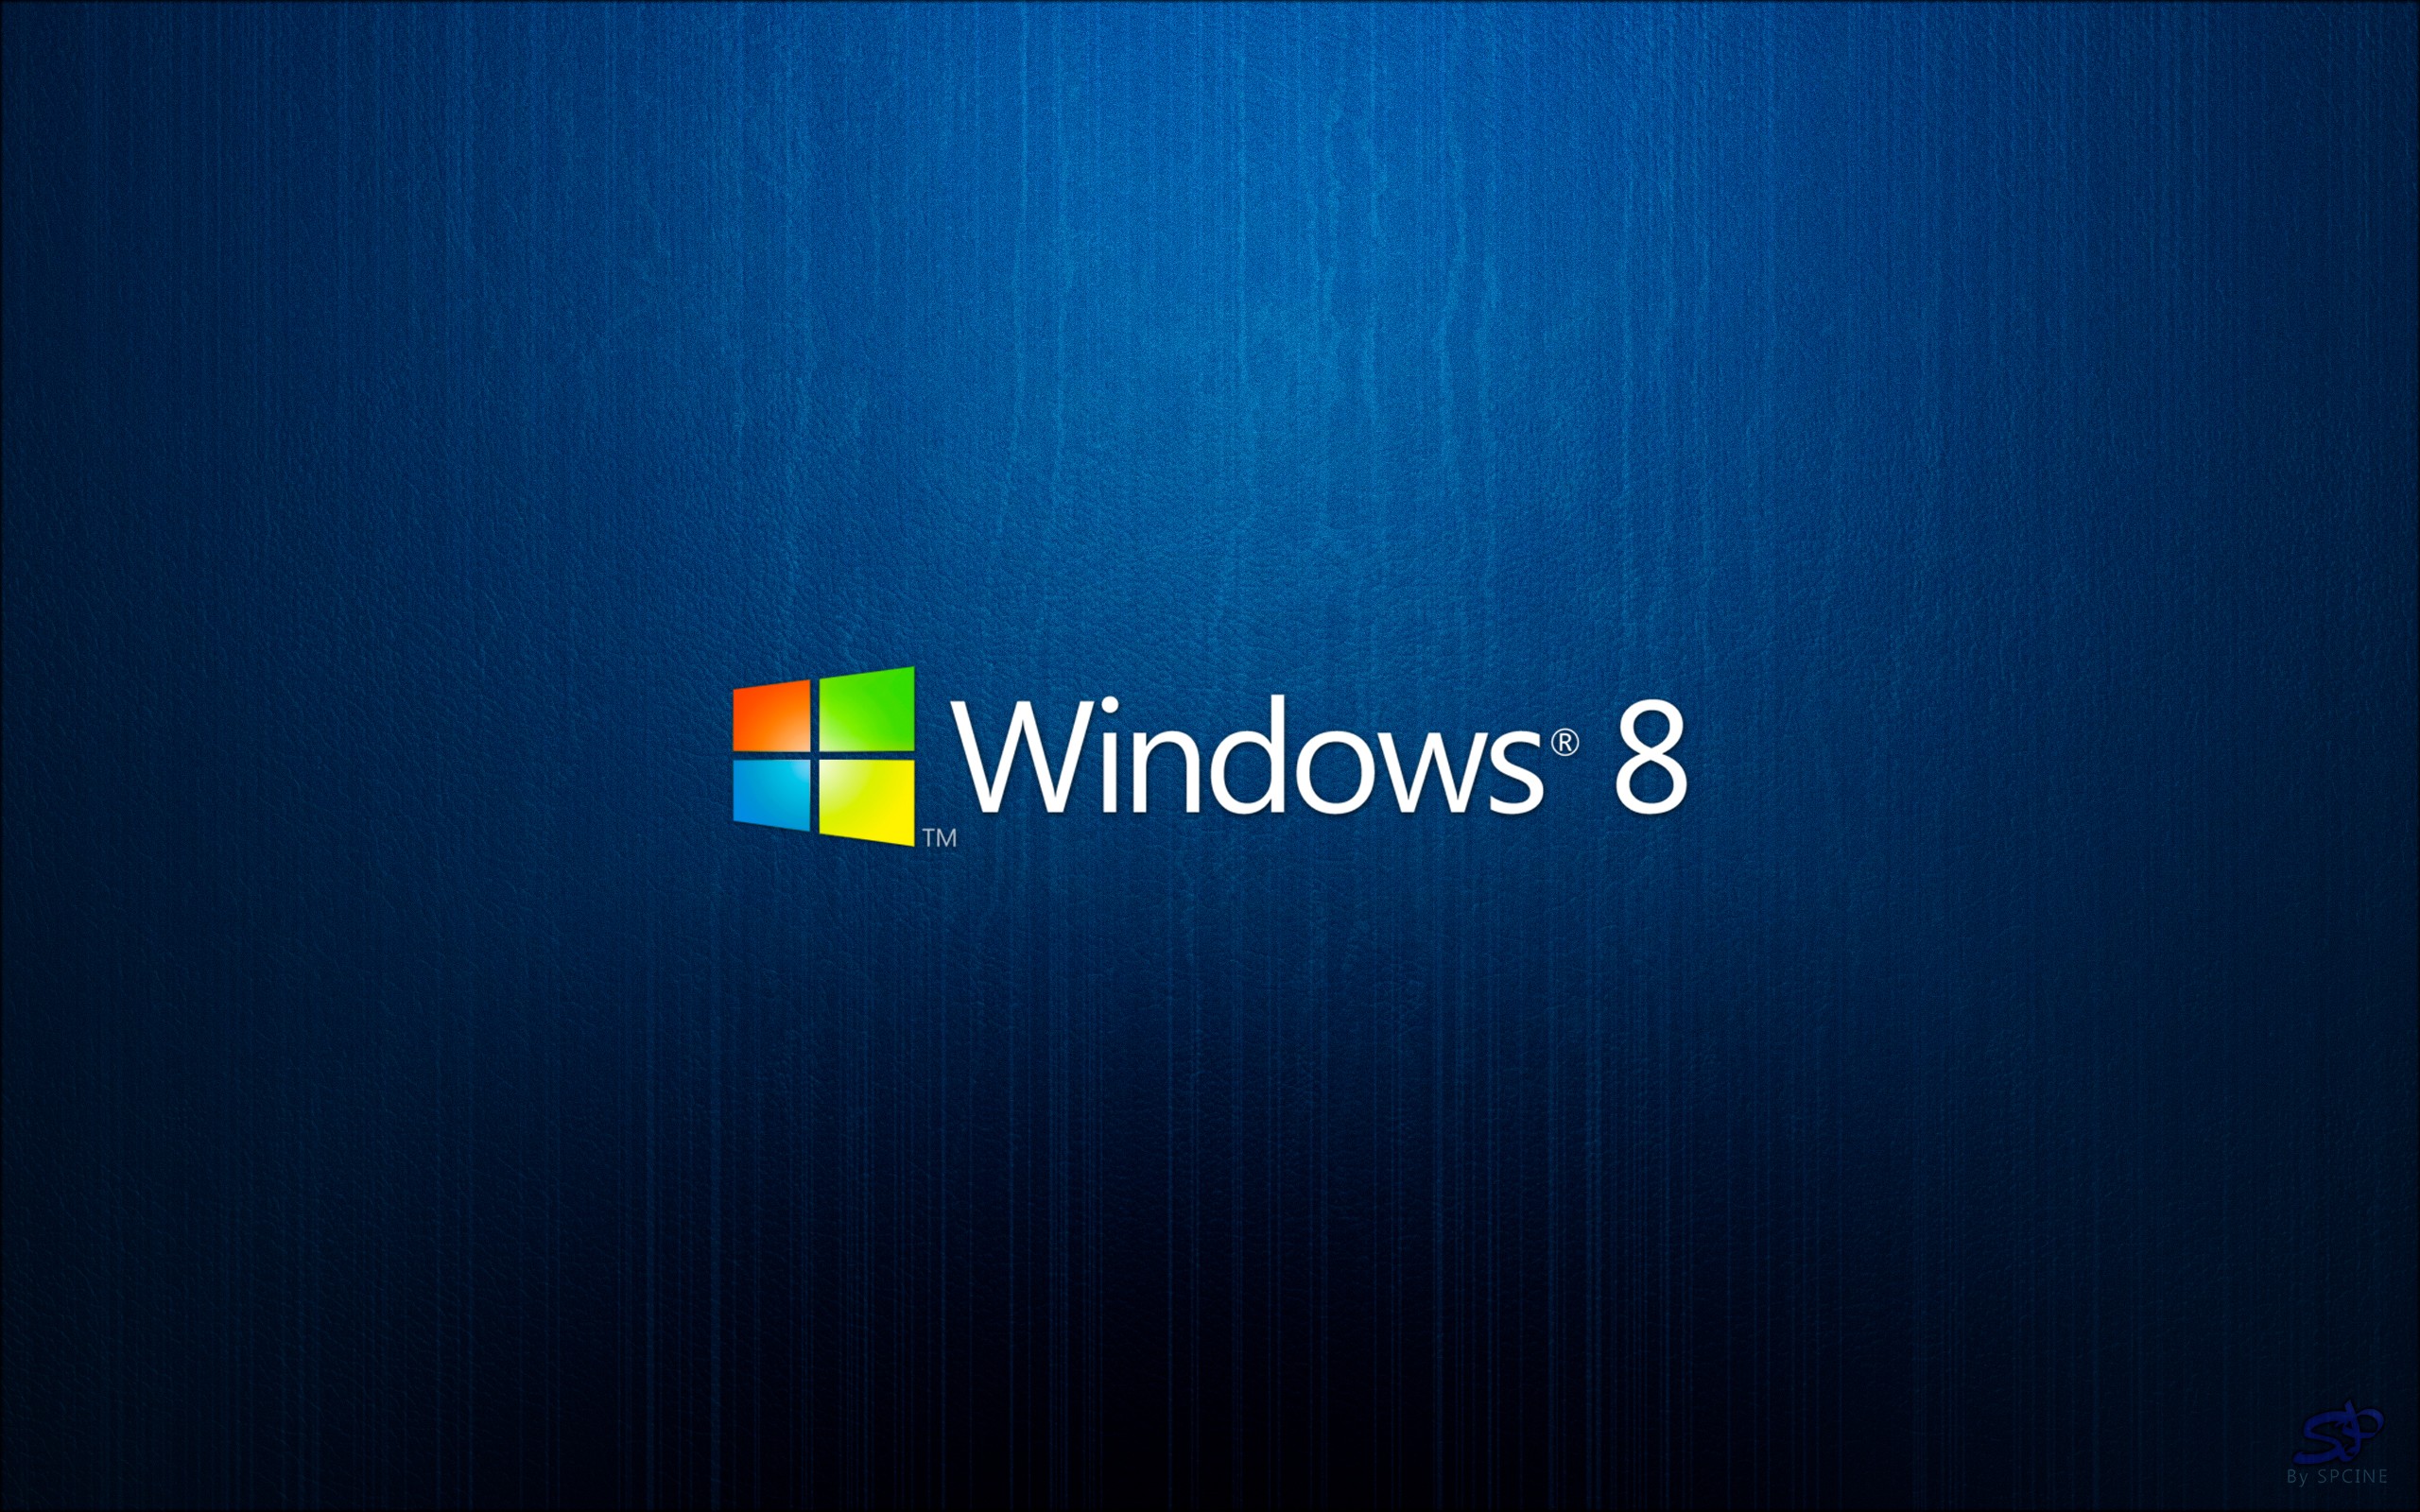 wallpaper for laptop windows 8,operating system,text,font,logo,sky